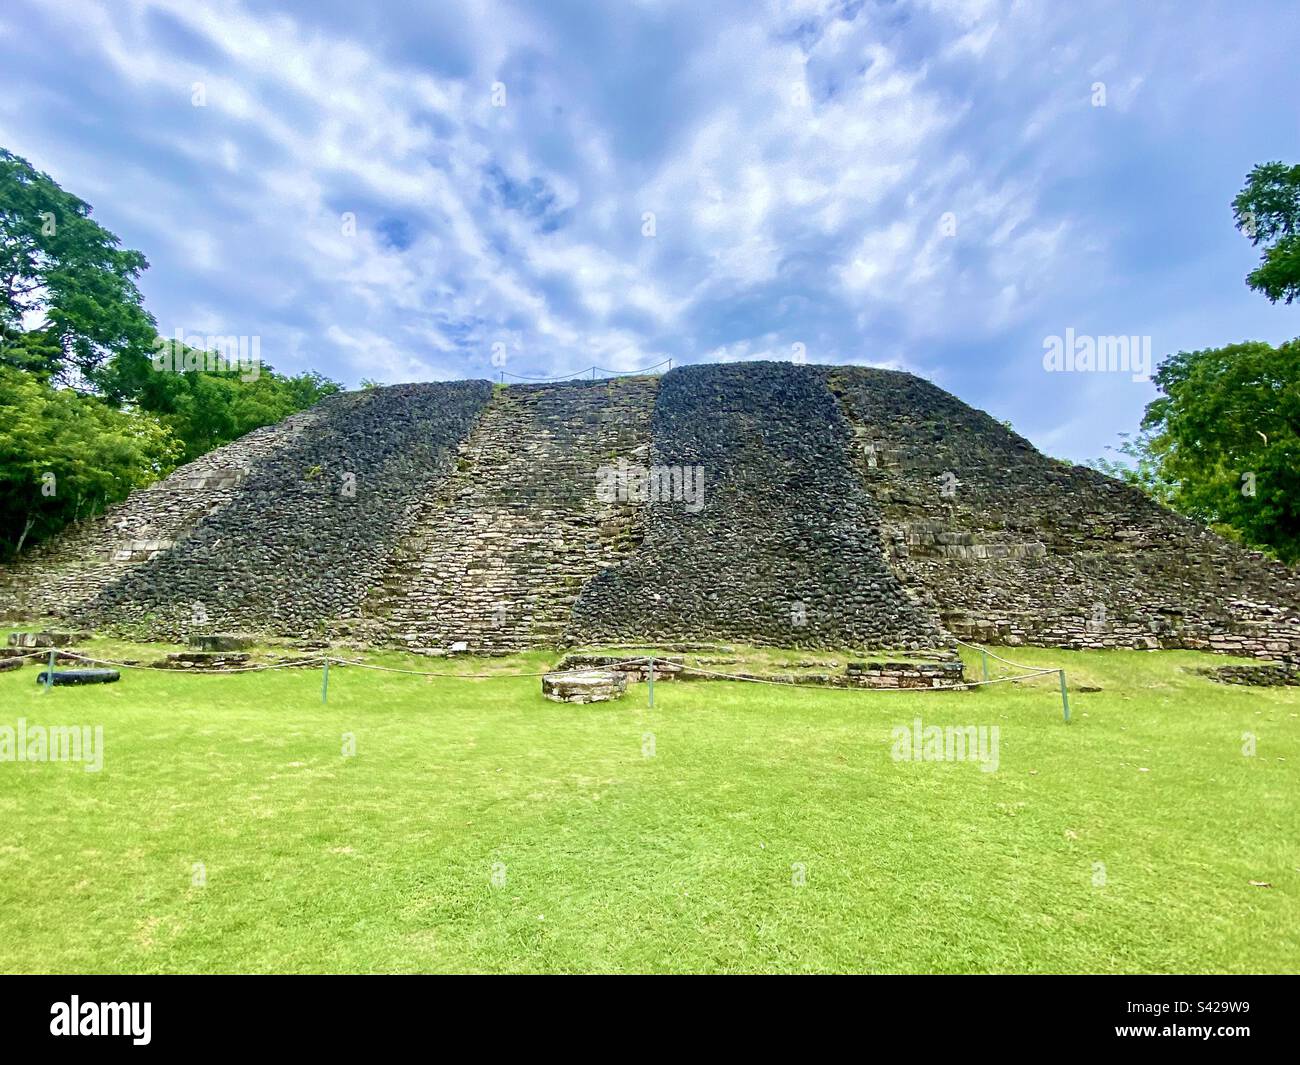 Mayan ruins at Xunantunich Archaeological Reserve, Cayo District, Belize Stock Photo